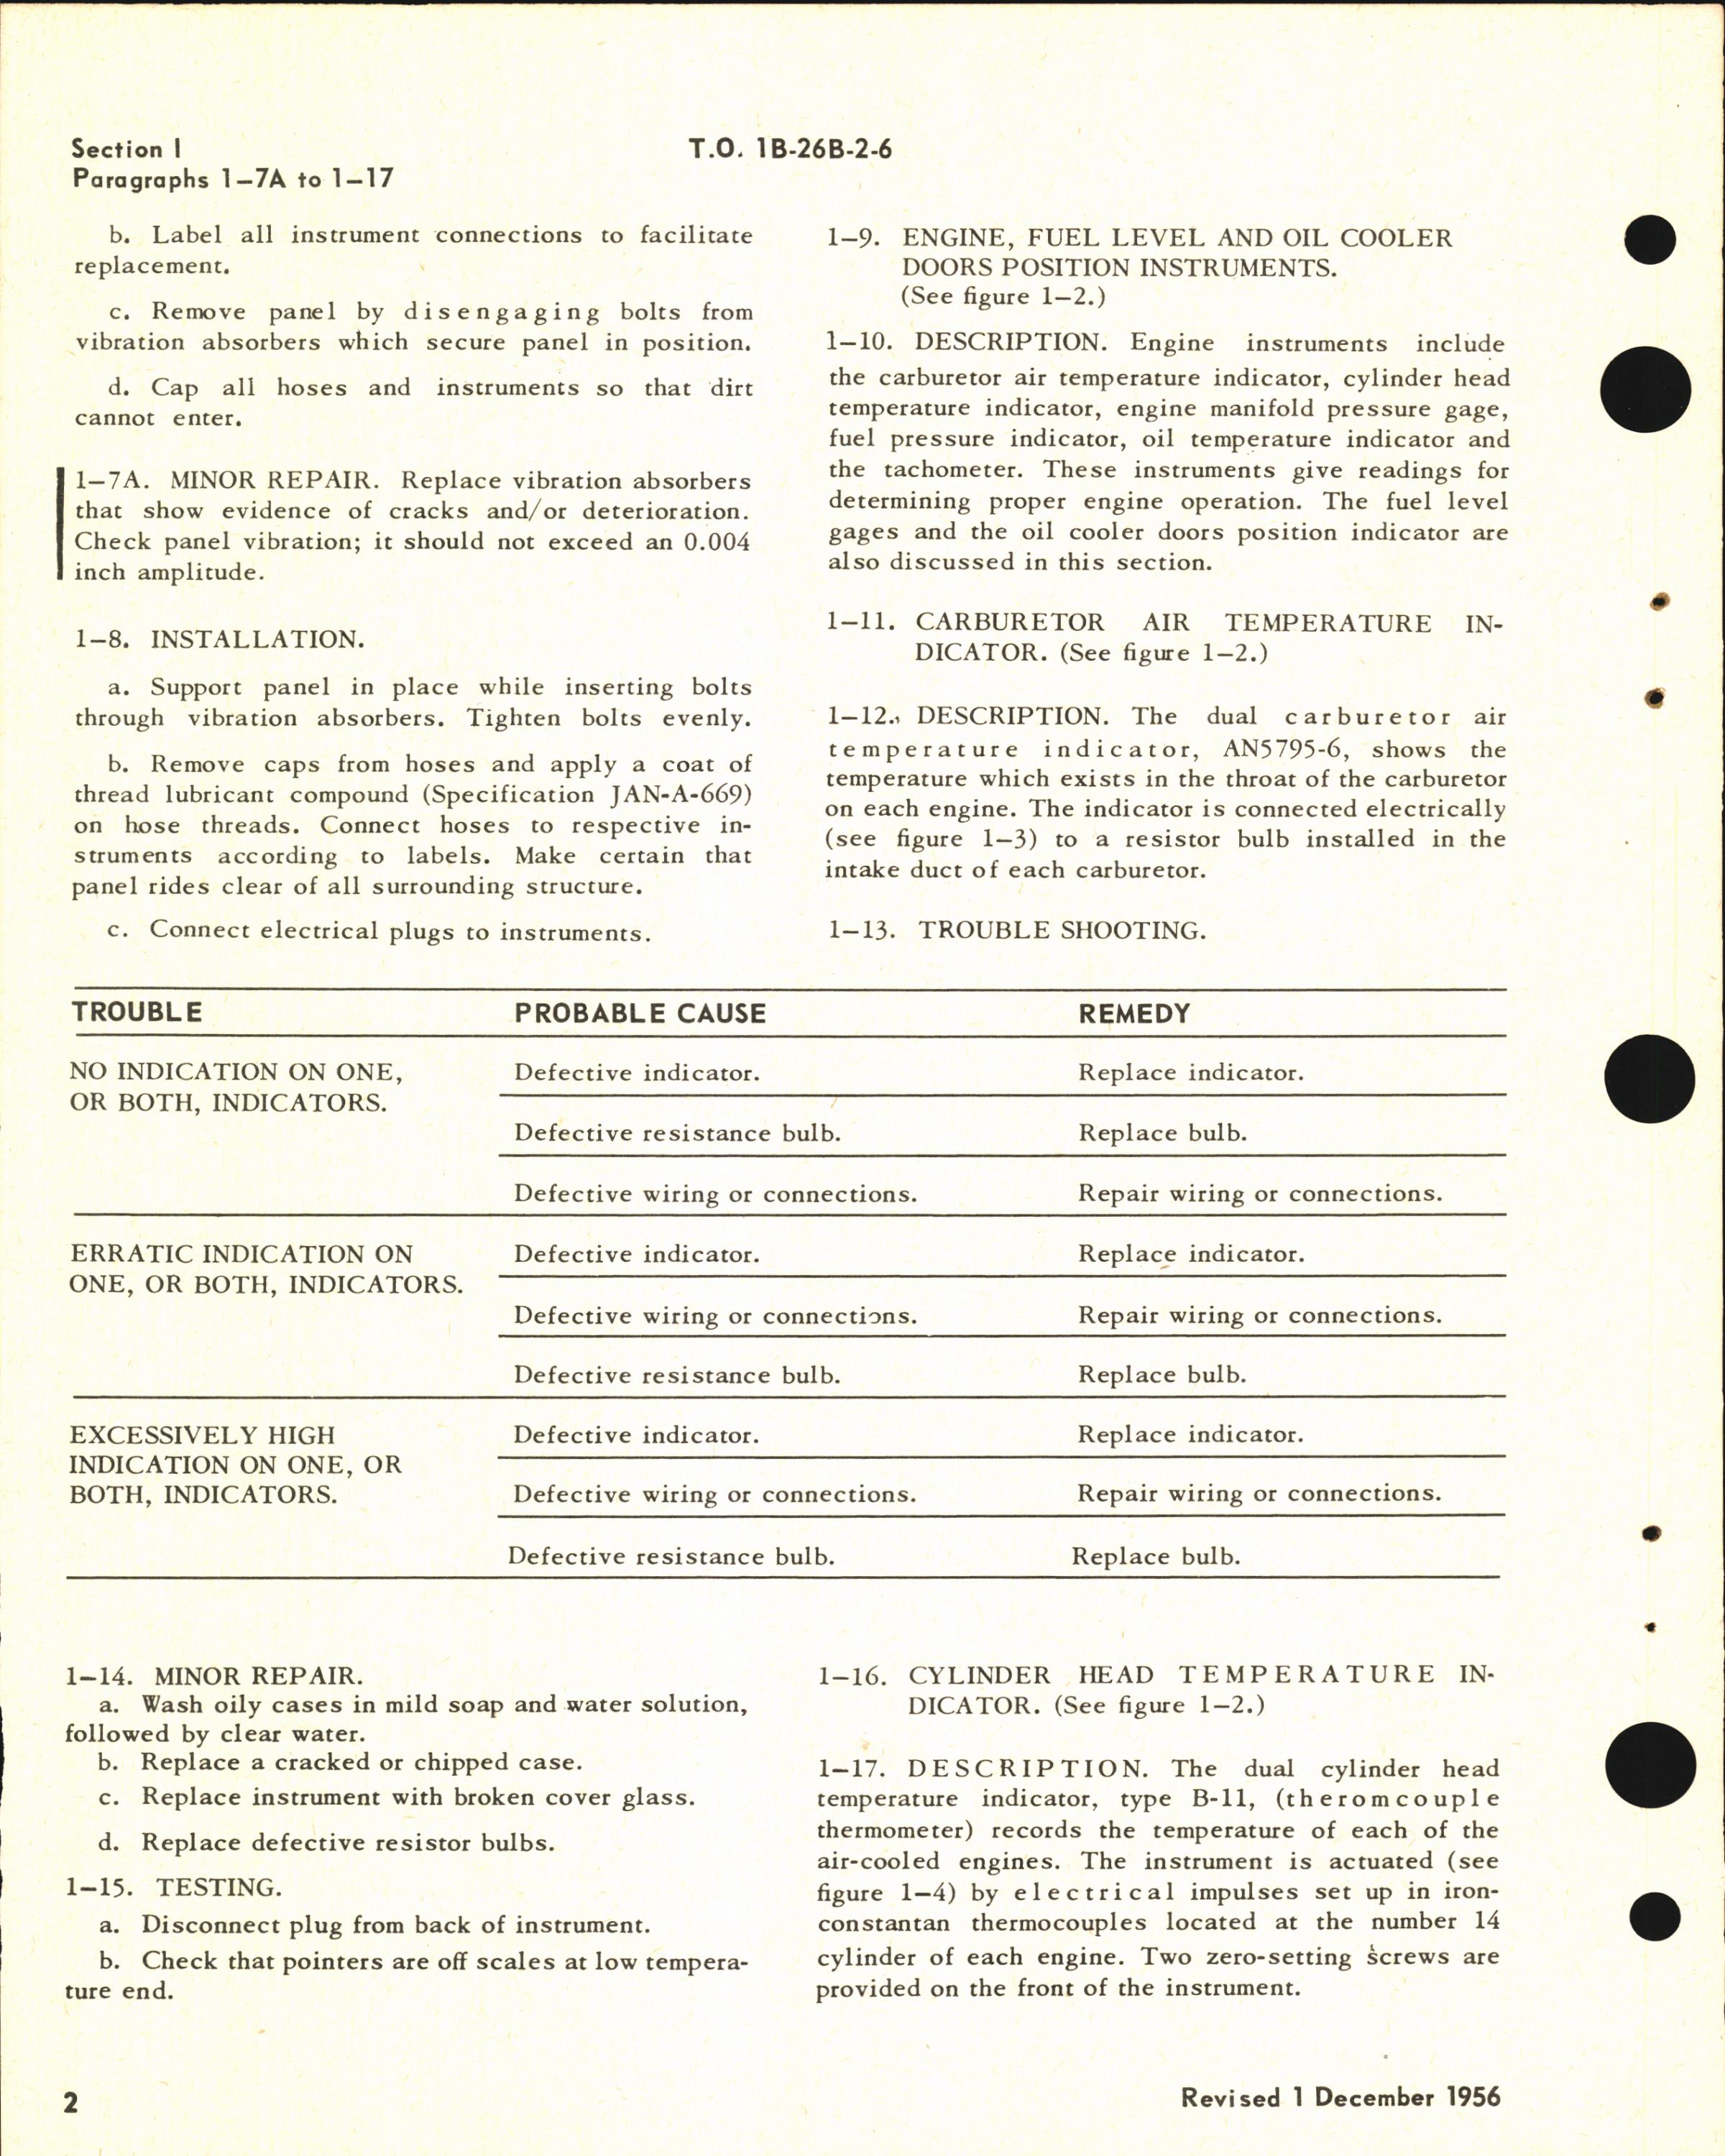 Sample page 8 from AirCorps Library document: Maintenance Instructions for B-26B, B-26C, TB-26B, TB-26C, and JD-1 - Instruments & Autopilot